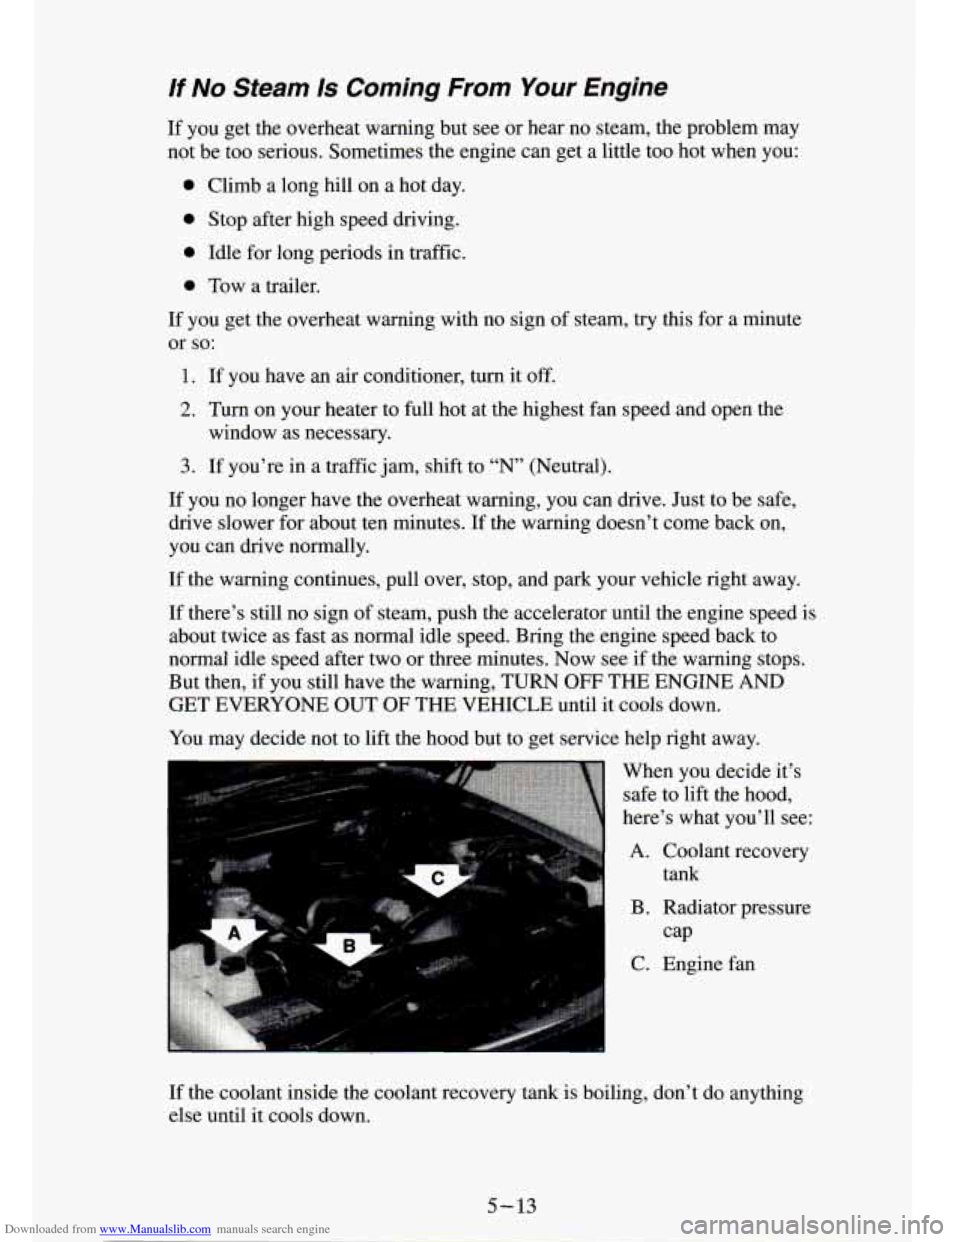 CHEVROLET S10 1994 2.G Owners Manual Downloaded from www.Manualslib.com manuals search engine /f No Steam Is Coming  From Your Engine 
If you  get the overheat  warning  but  see or  hear  no  steam,  the  problem  may 
not  be  too  ser